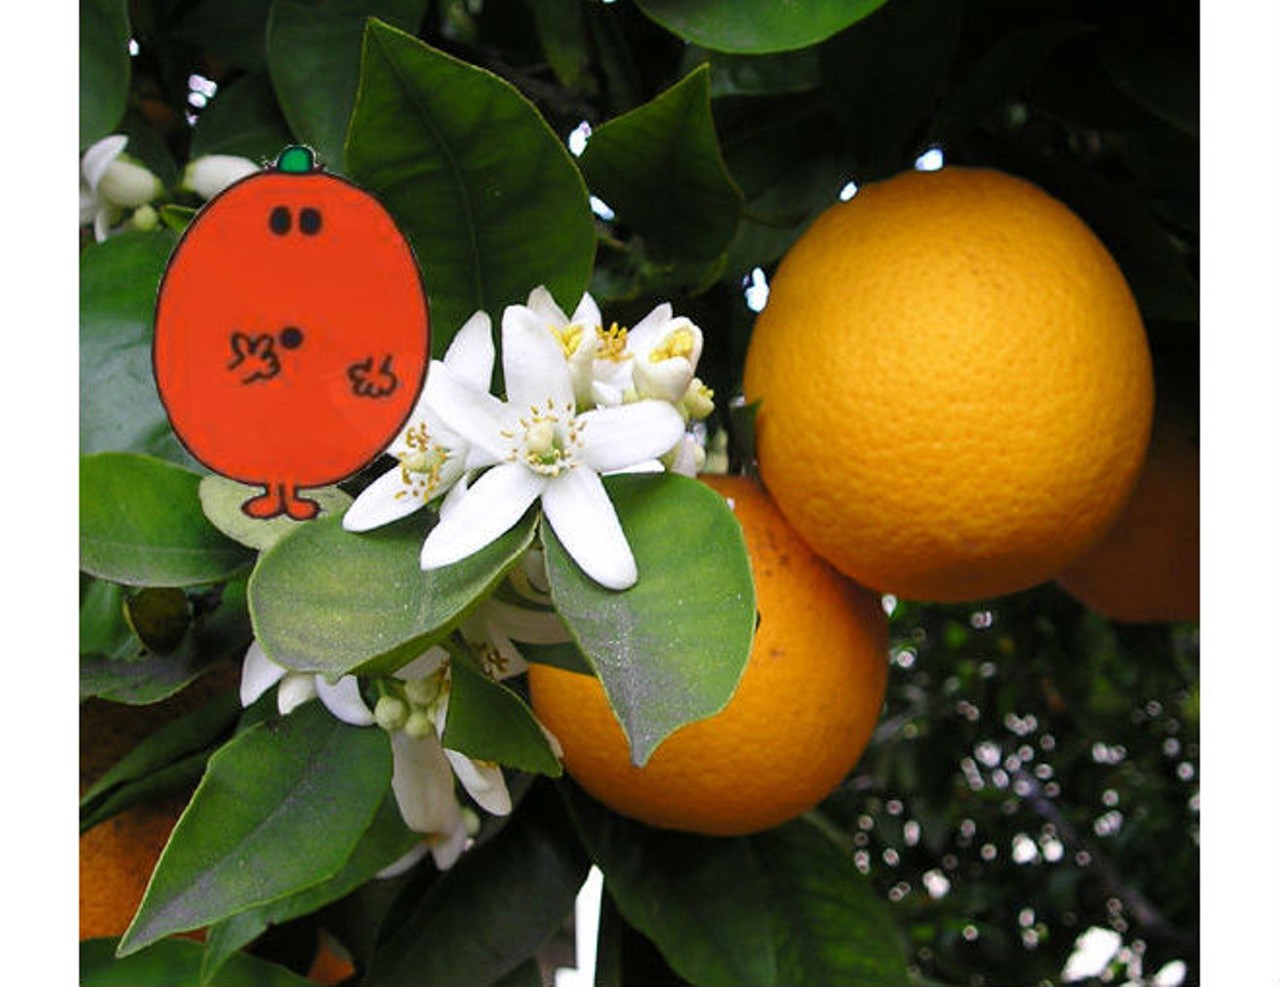 Forget citrus:Florida&#146;s environment has forsaken the citrus plant. Greening is slowly killing off our state&#146;s favorite fruit tree, leaving a substantial orange/lemon-shaped gap in our agricultural sector. Blueberries, pomegranates and some varieties of peach are perfectly suited for our climate and have earlier yields than fruits like oranges and lemons, and they all happen to be worth more on the market than our iconic citrus.